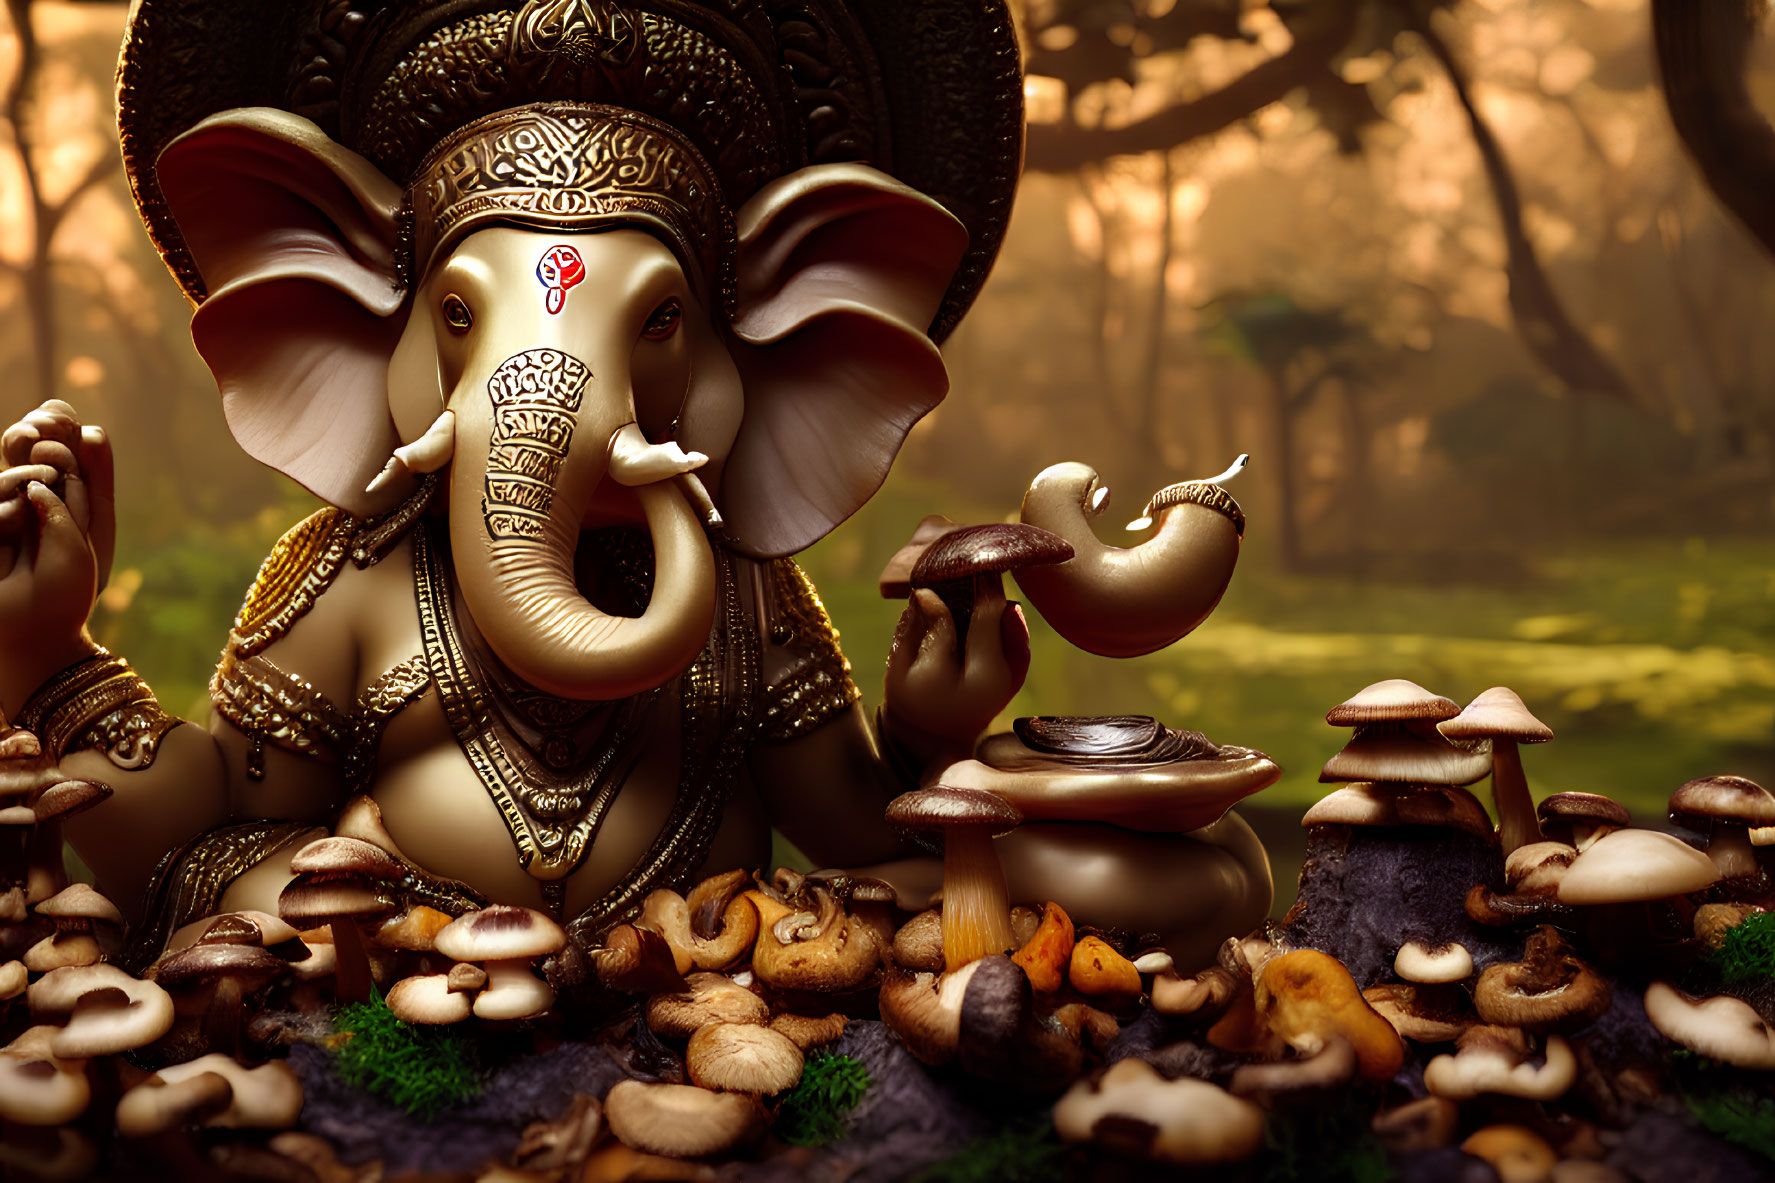 Detailed Ganesha statue with mushrooms in misty forest